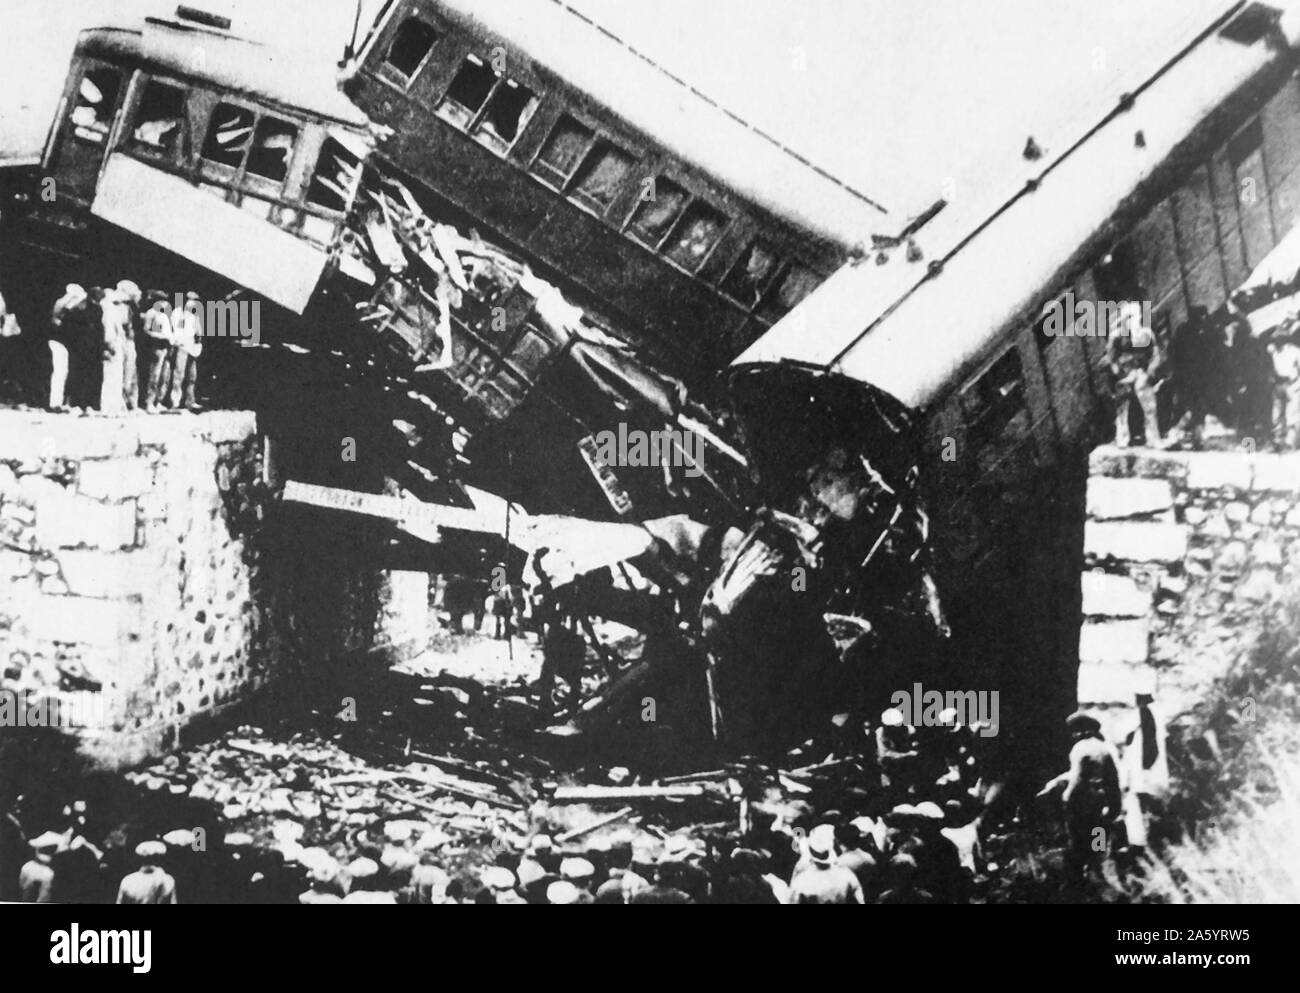 Wreckage of a train on the Seville to Barcelona route 1936. The train has derailed after a terrorist explosion attributed to communists. Stock Photo